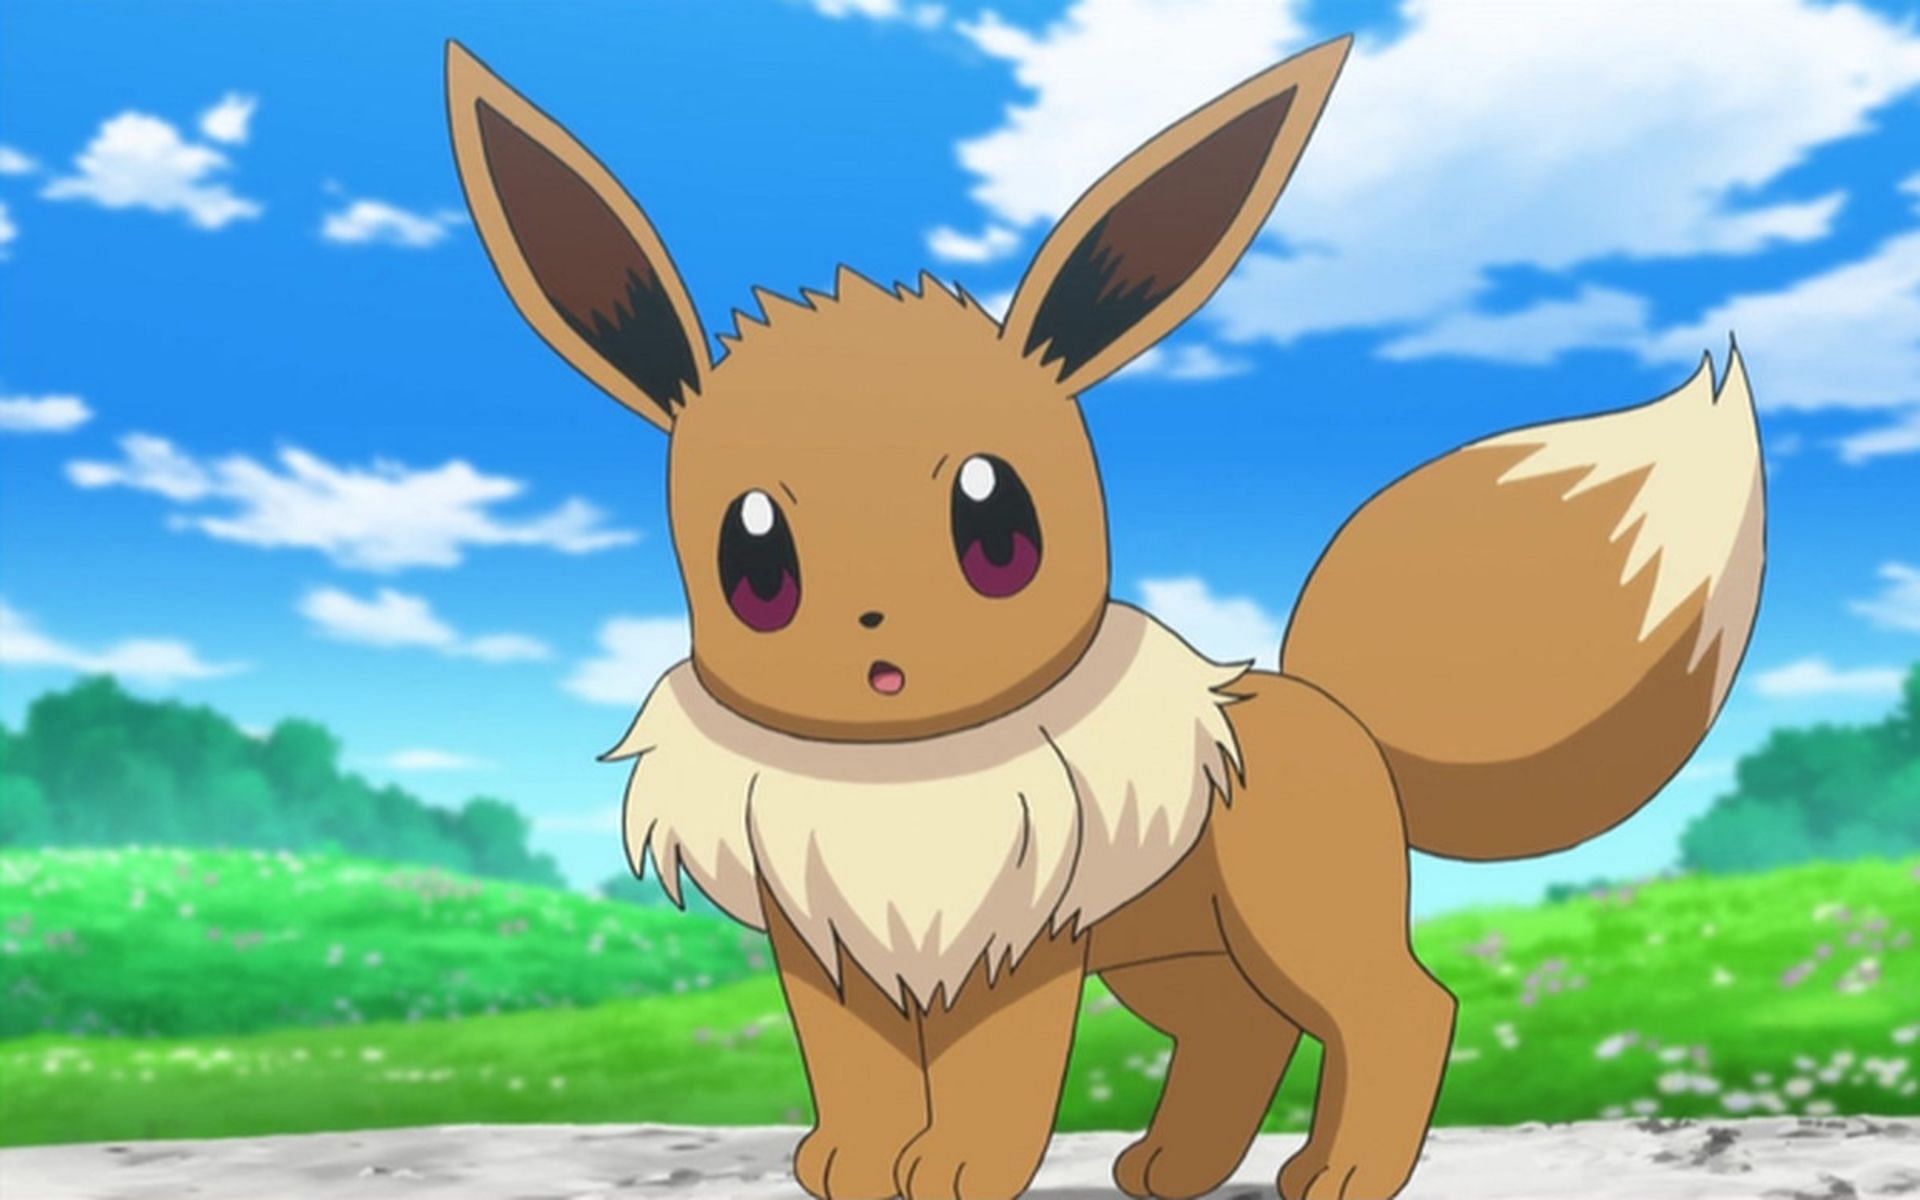 Trainers can pick up Eevee from Bebe (Image via The Pokemon Company)